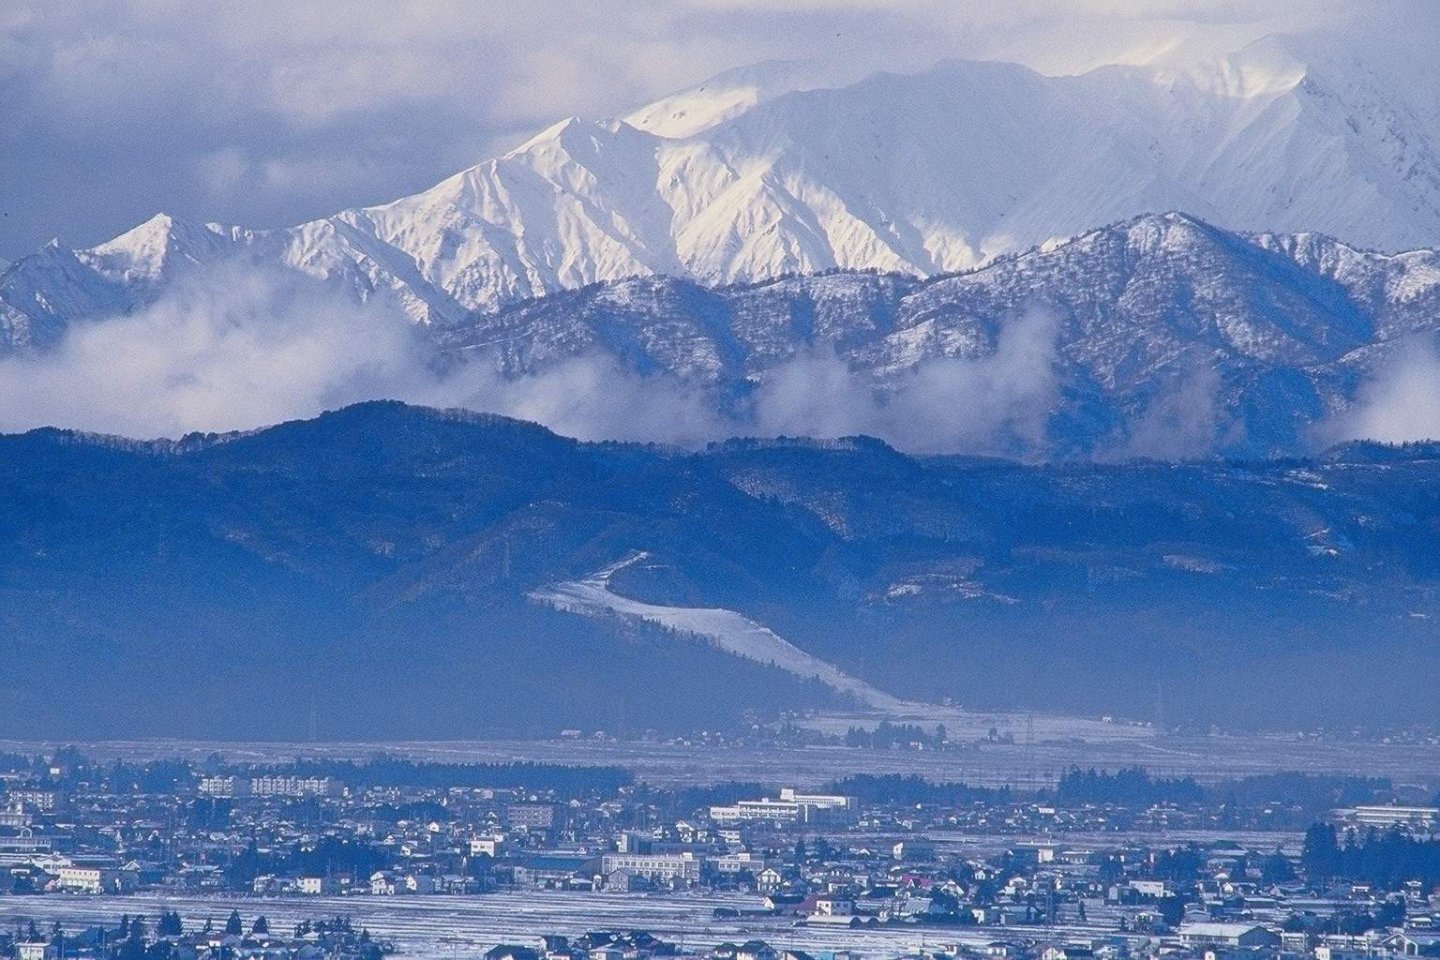 Winter snows cover the surrounding mountains